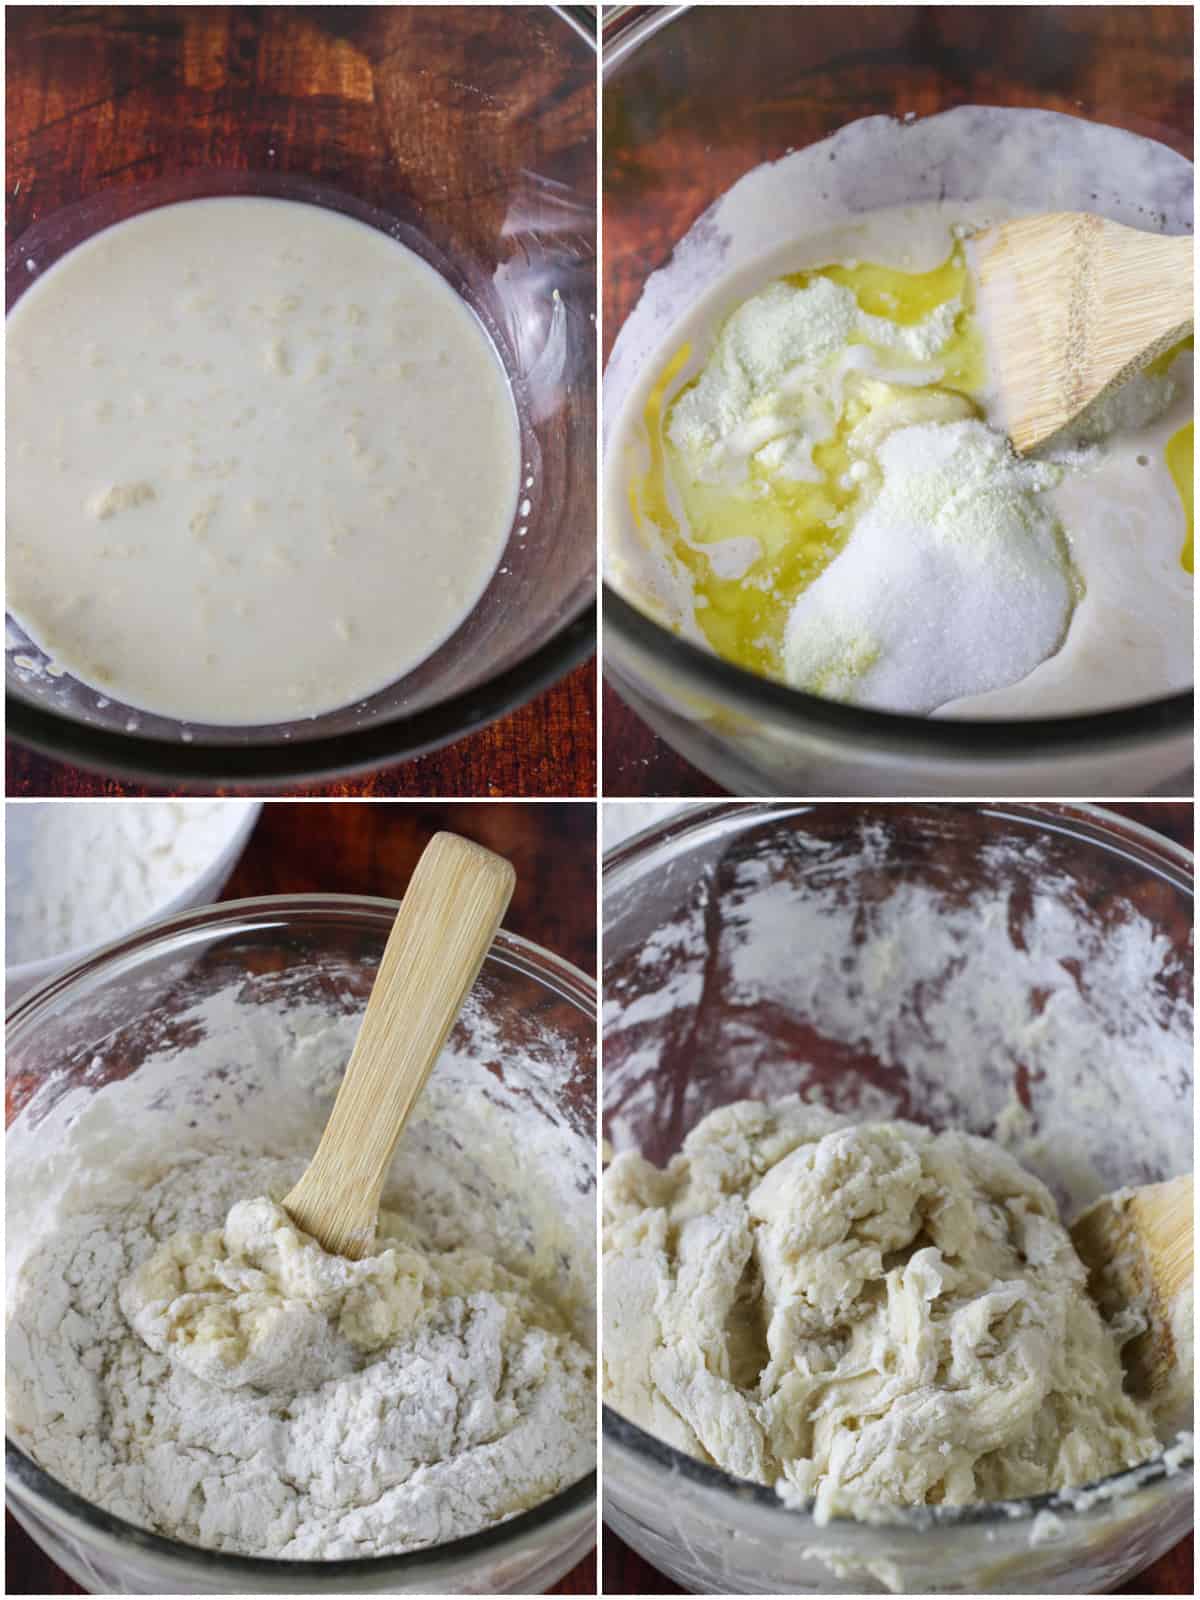 A collage showing the mixing of the coconut bread dough.